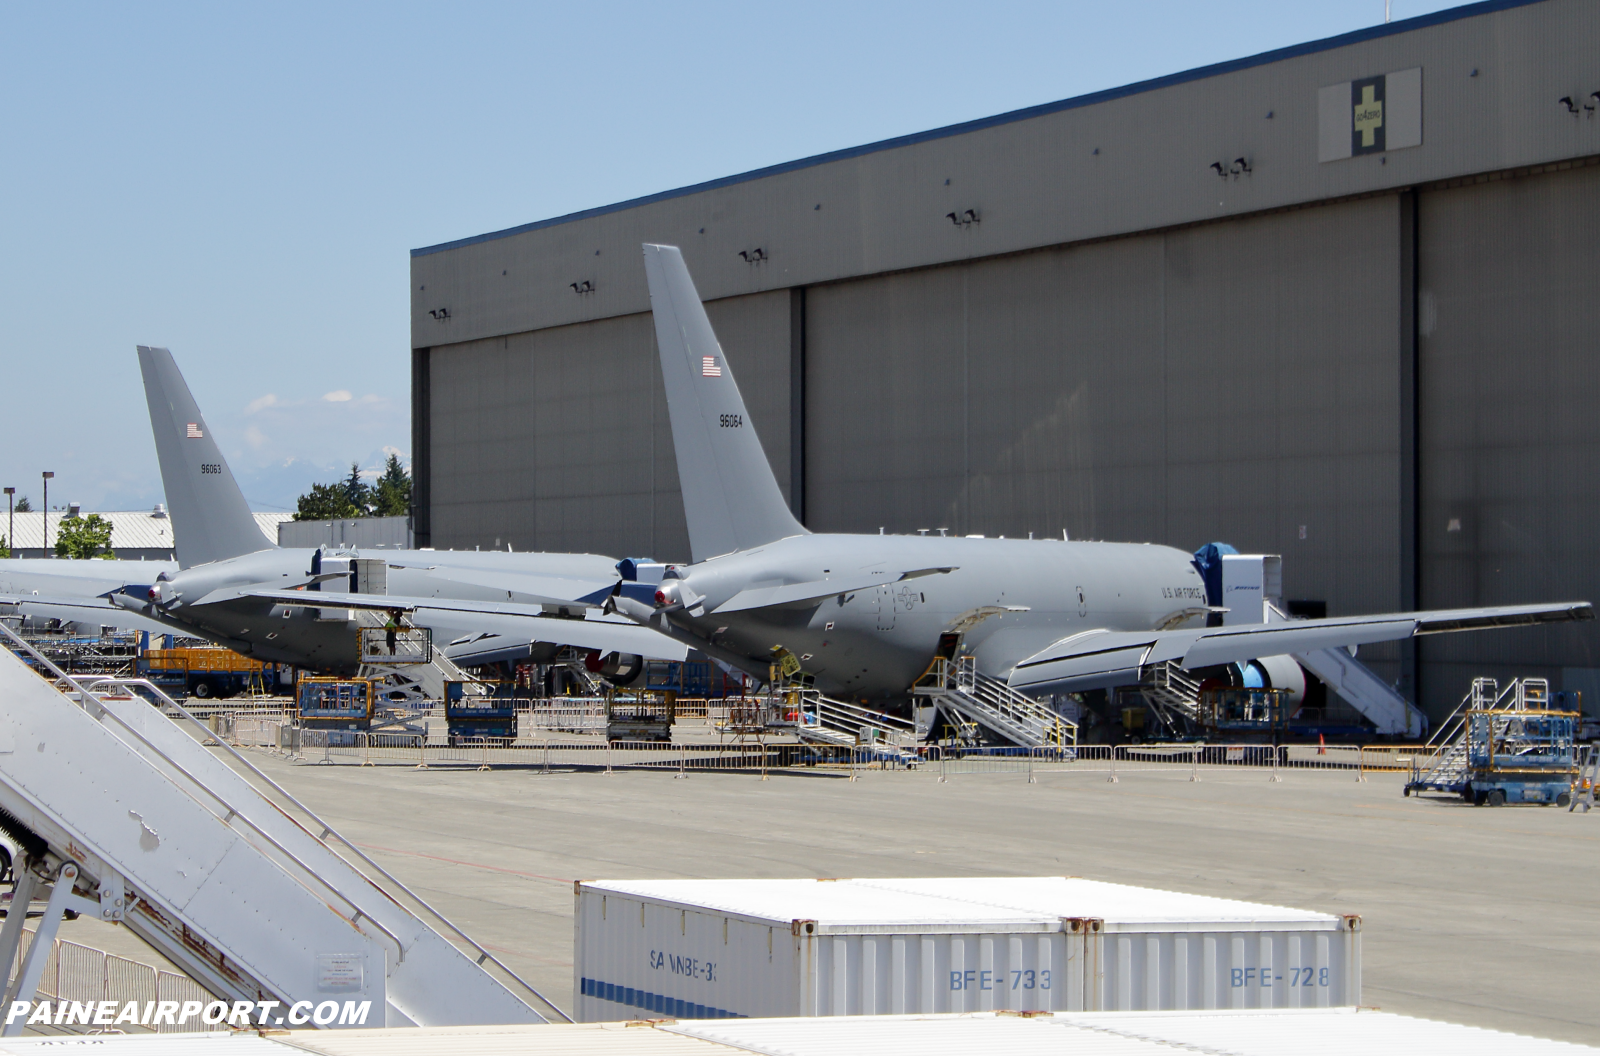 Everett Modification Center at KPAE Paine Field